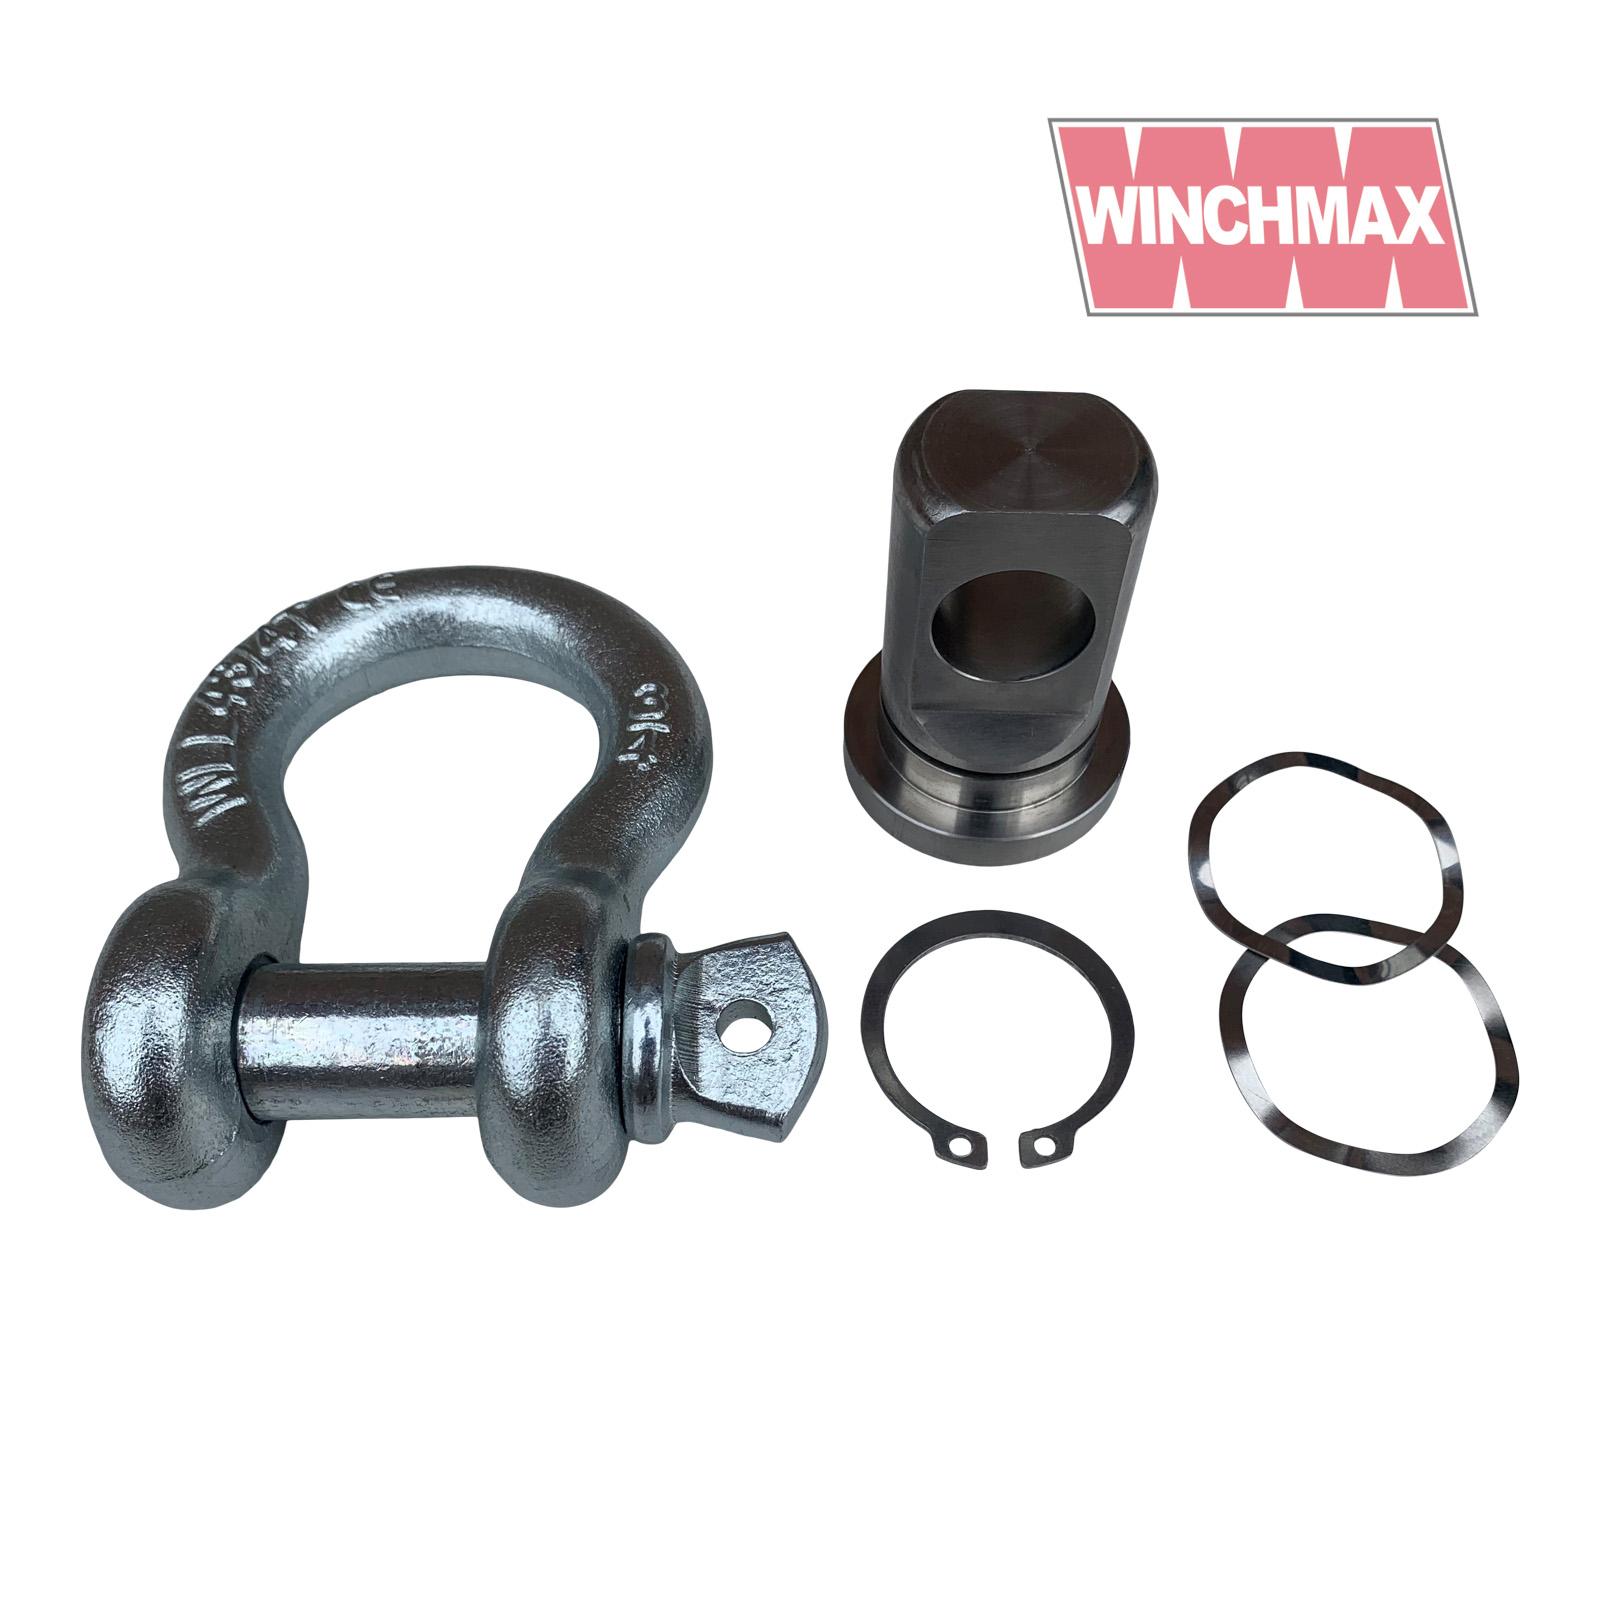 Swivel recovery eye 36mm for winch bumper stainless steel  shackle and circlip 